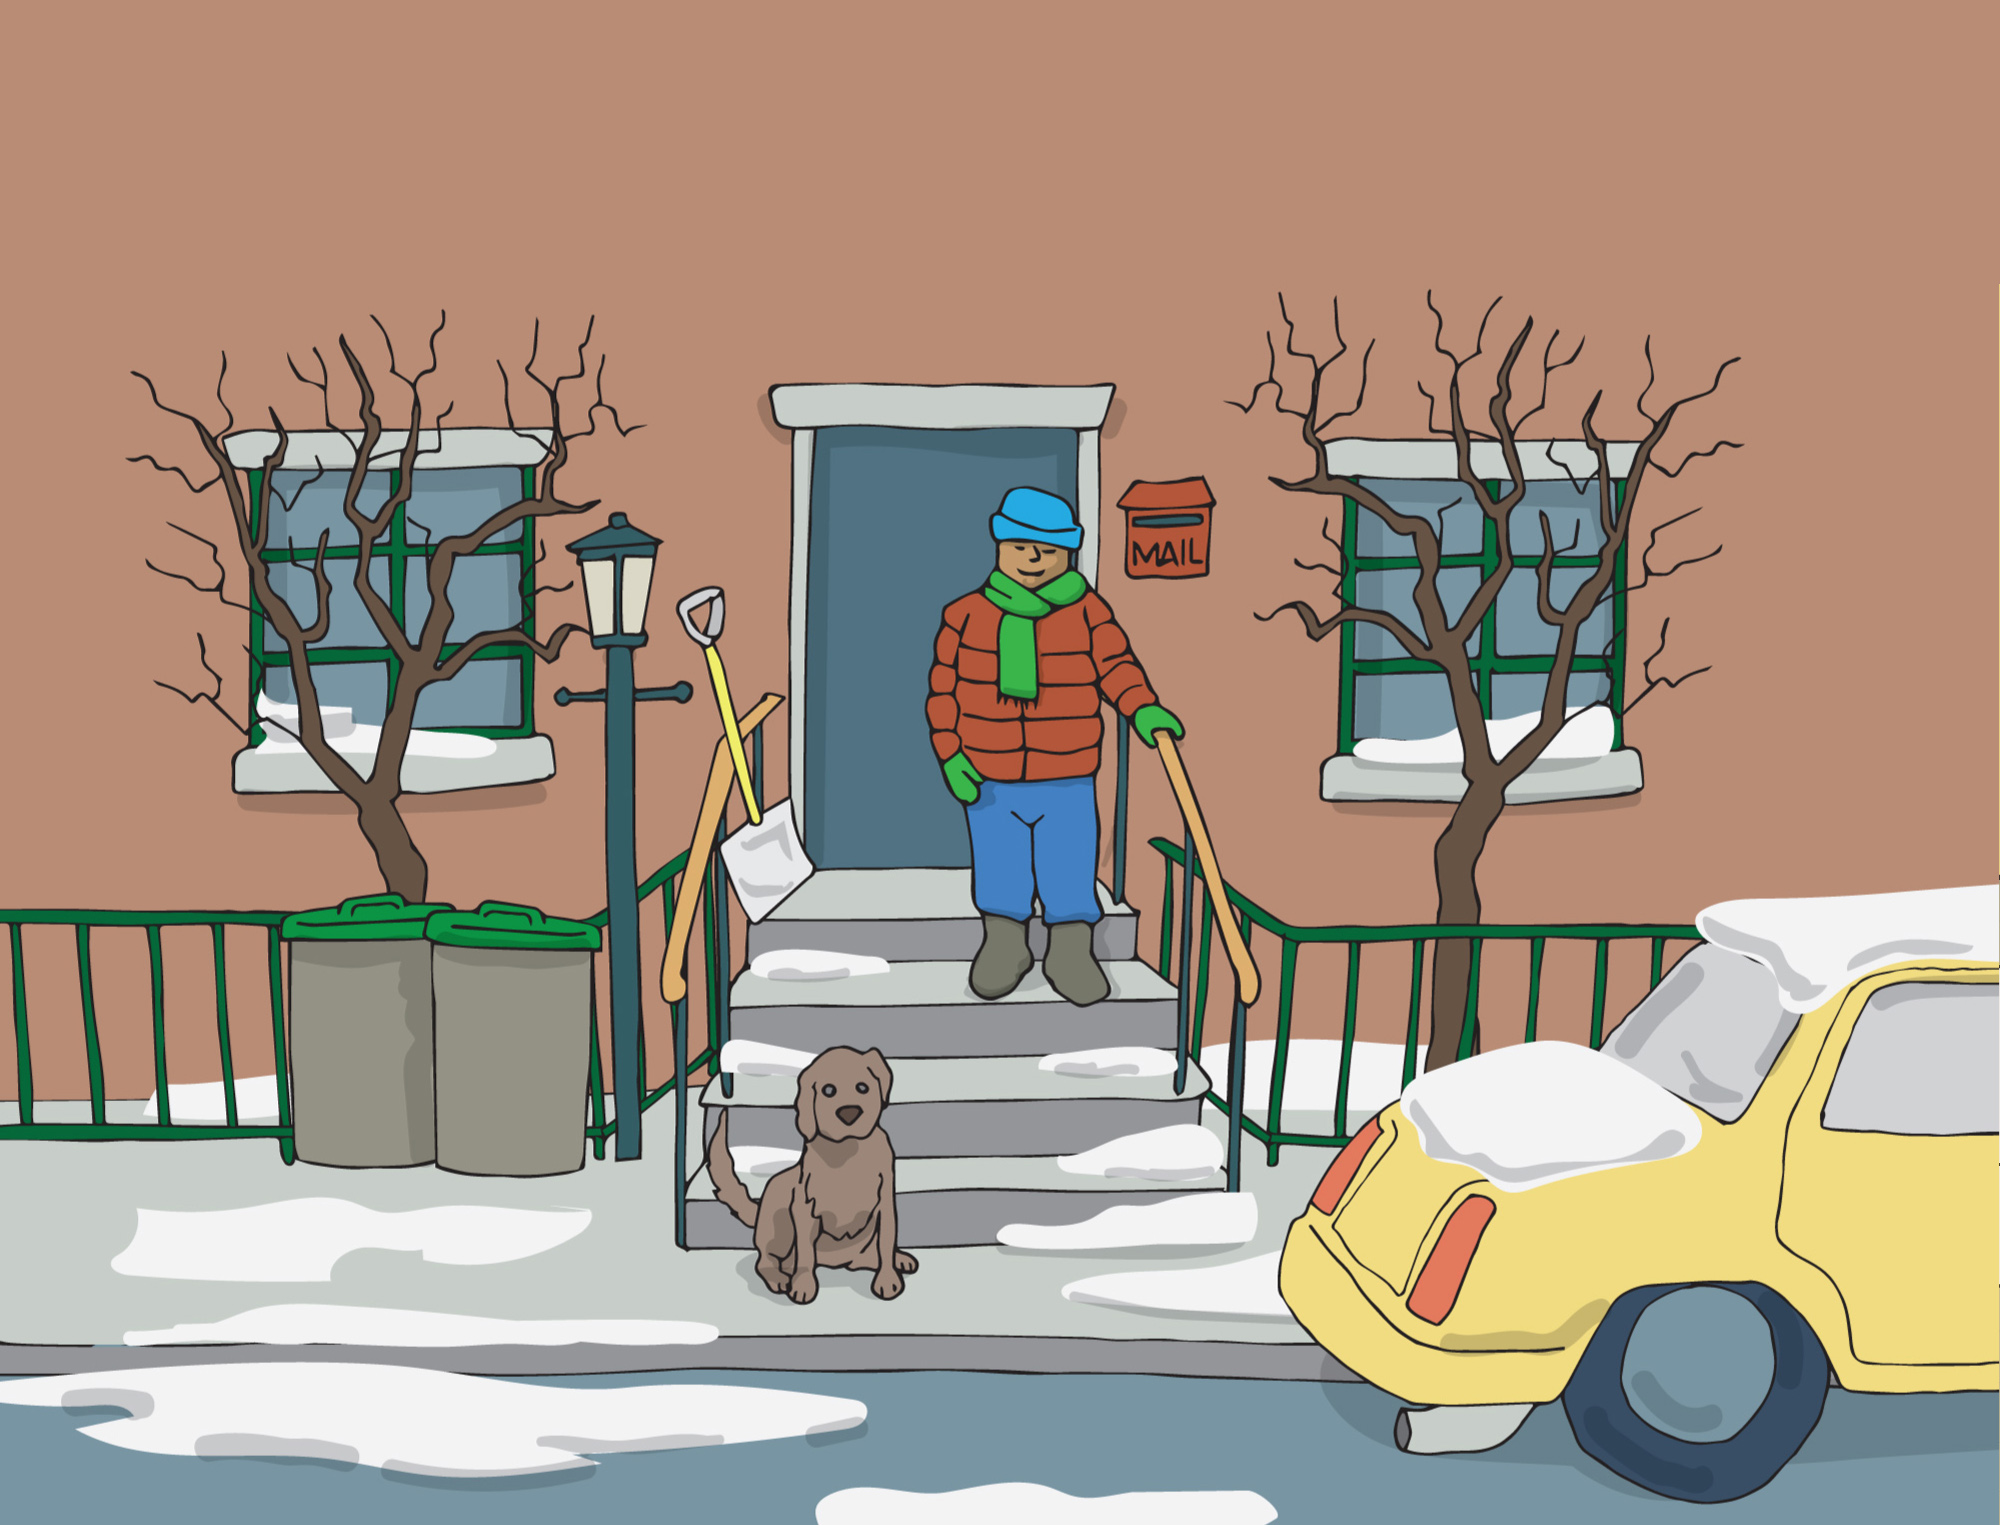 A man is walking out of his building wearing warm winter clothing, including a hat, scarf, gloves and big coat. He is standing on the stairs in front of his building door, between two trees and next to a red mailbox, holding the stair railing with one hand. On the stairs, there is a shovel and at the bottom of the stairs there is a dog sitting. It is snowing and there are small piles of snow on the stairs, sidewalk and street. There is a yellow car parked in front of the house, covered in snow. There are five snowflake icons that can be clicked on for information. They are located next to the man, the shovel, the stairs, the dog and the car.